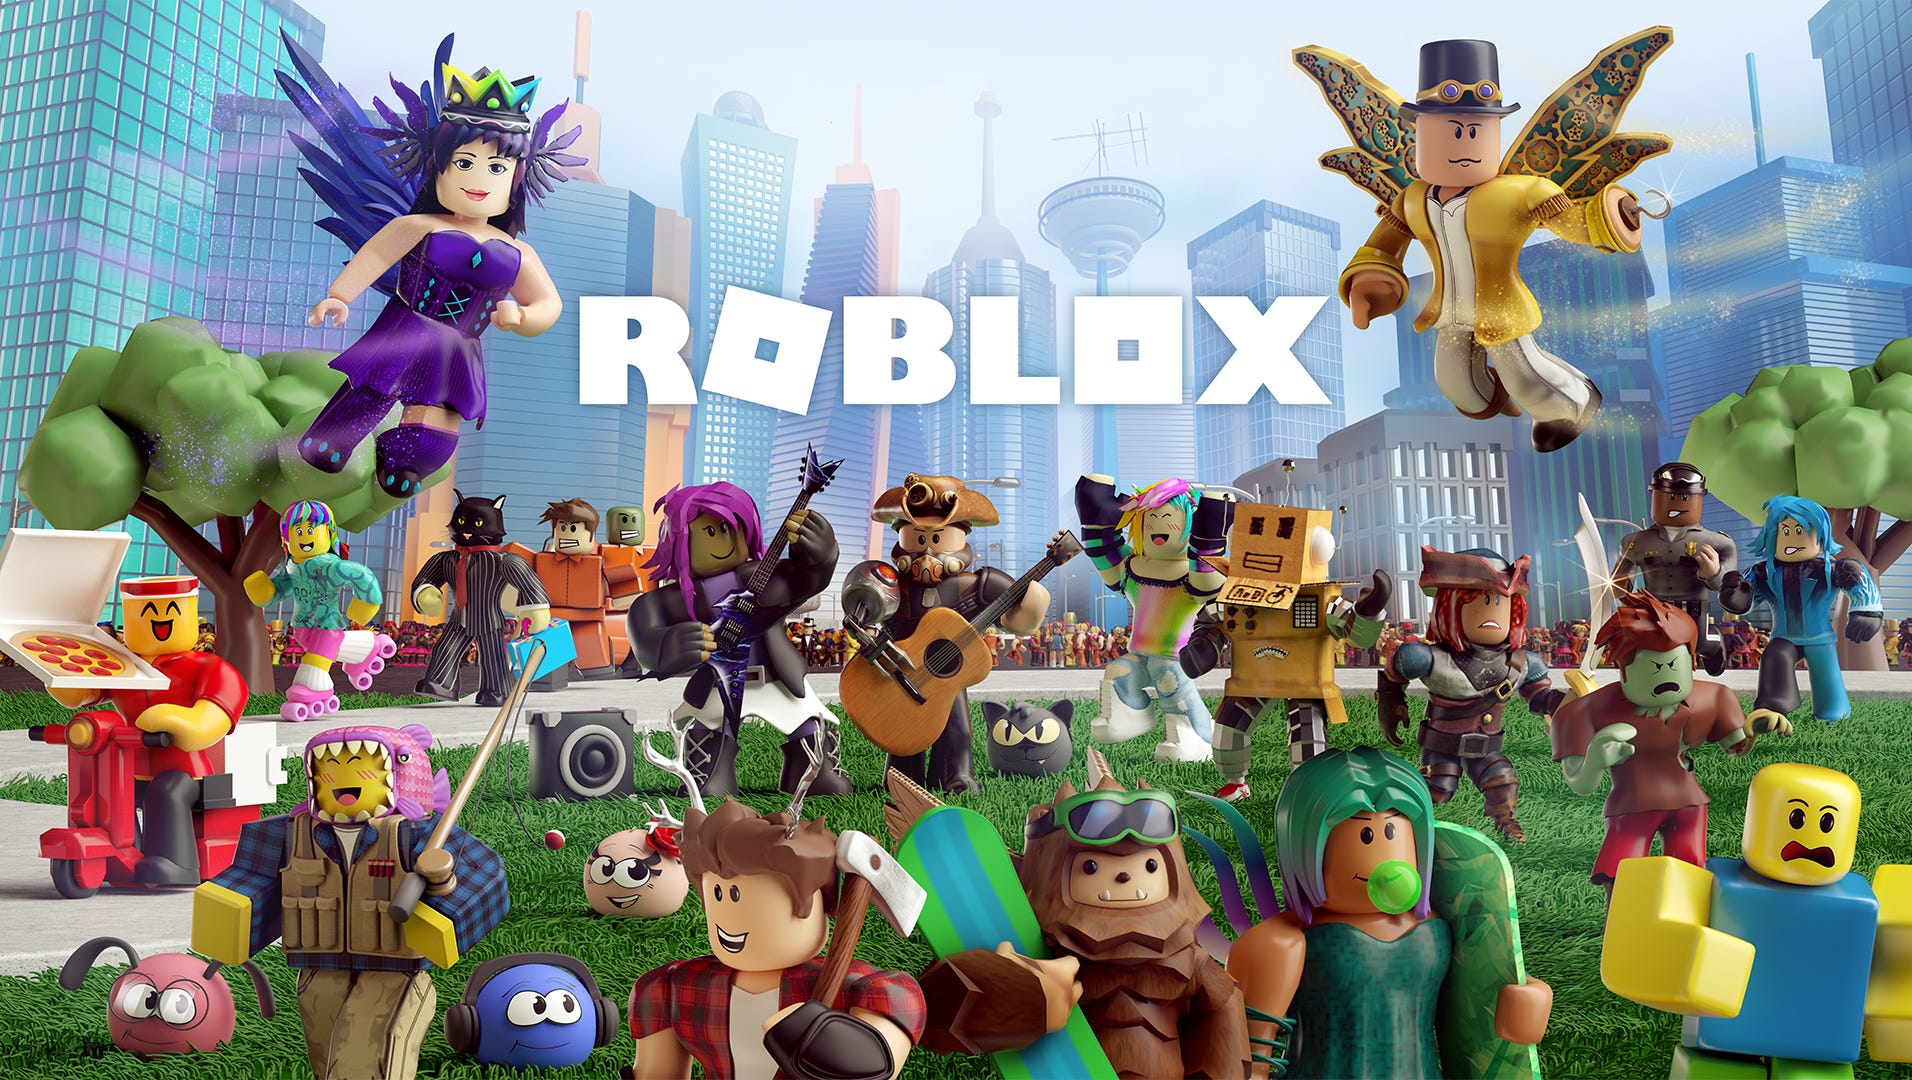 Roblox Kids Game Shows Character Being Sexually Violated - sword roblox plastic tv movie video game action figures